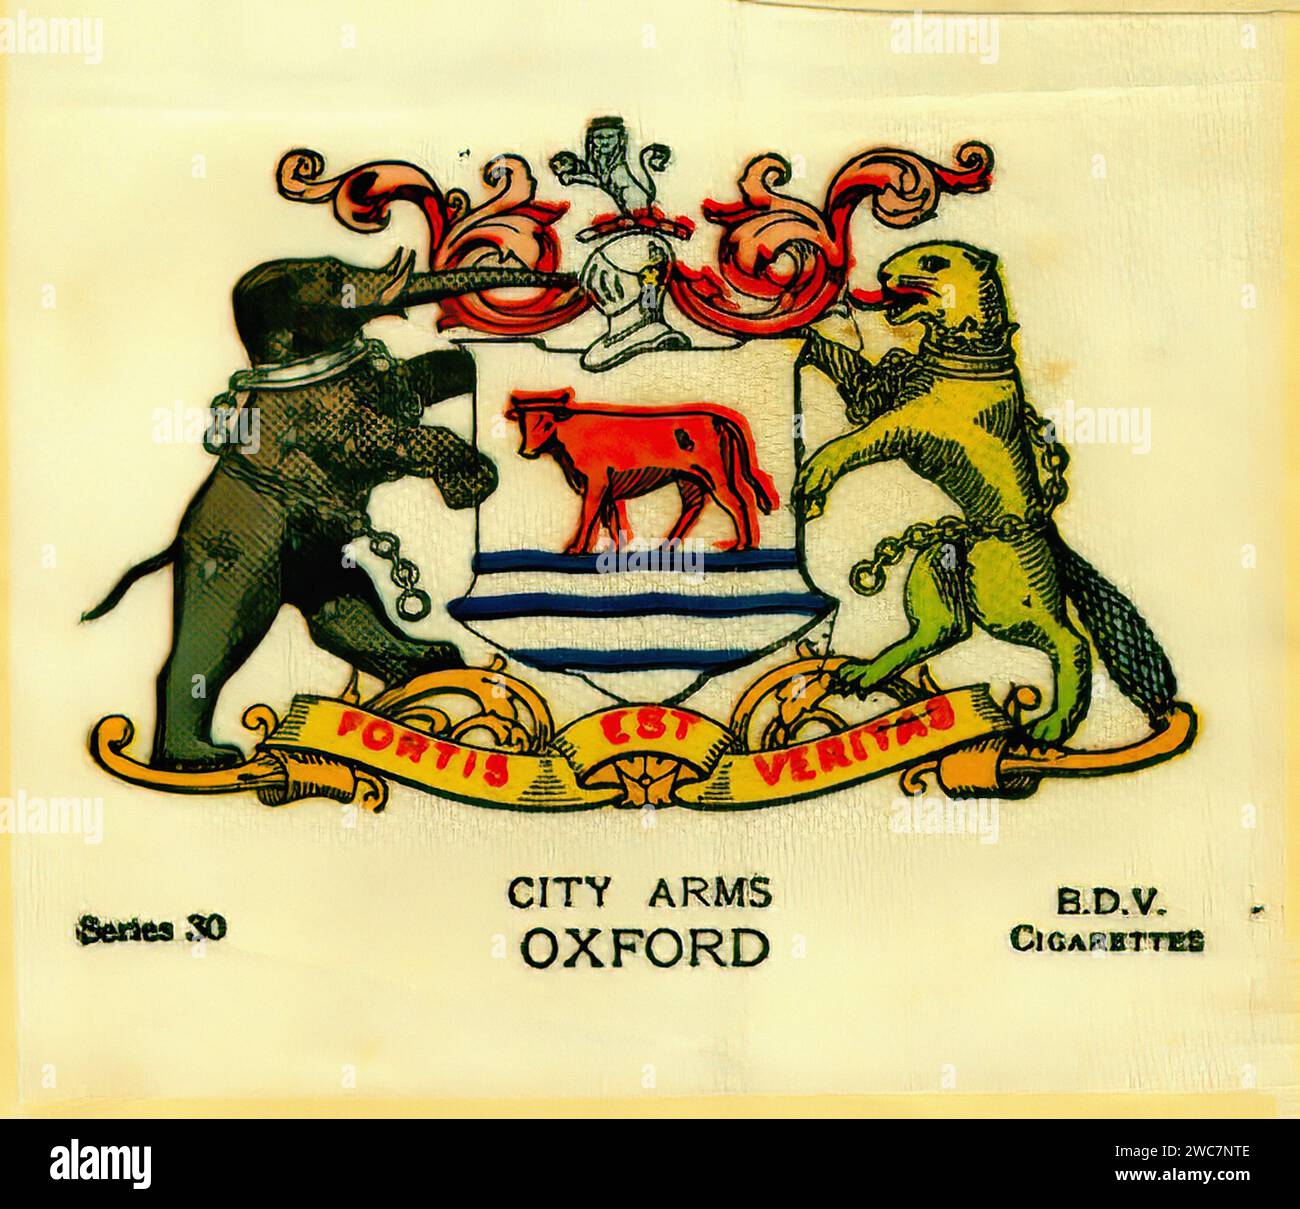 City Arms of Oxford - Vintage Cigarette Card Silk Illustration Stock Photo